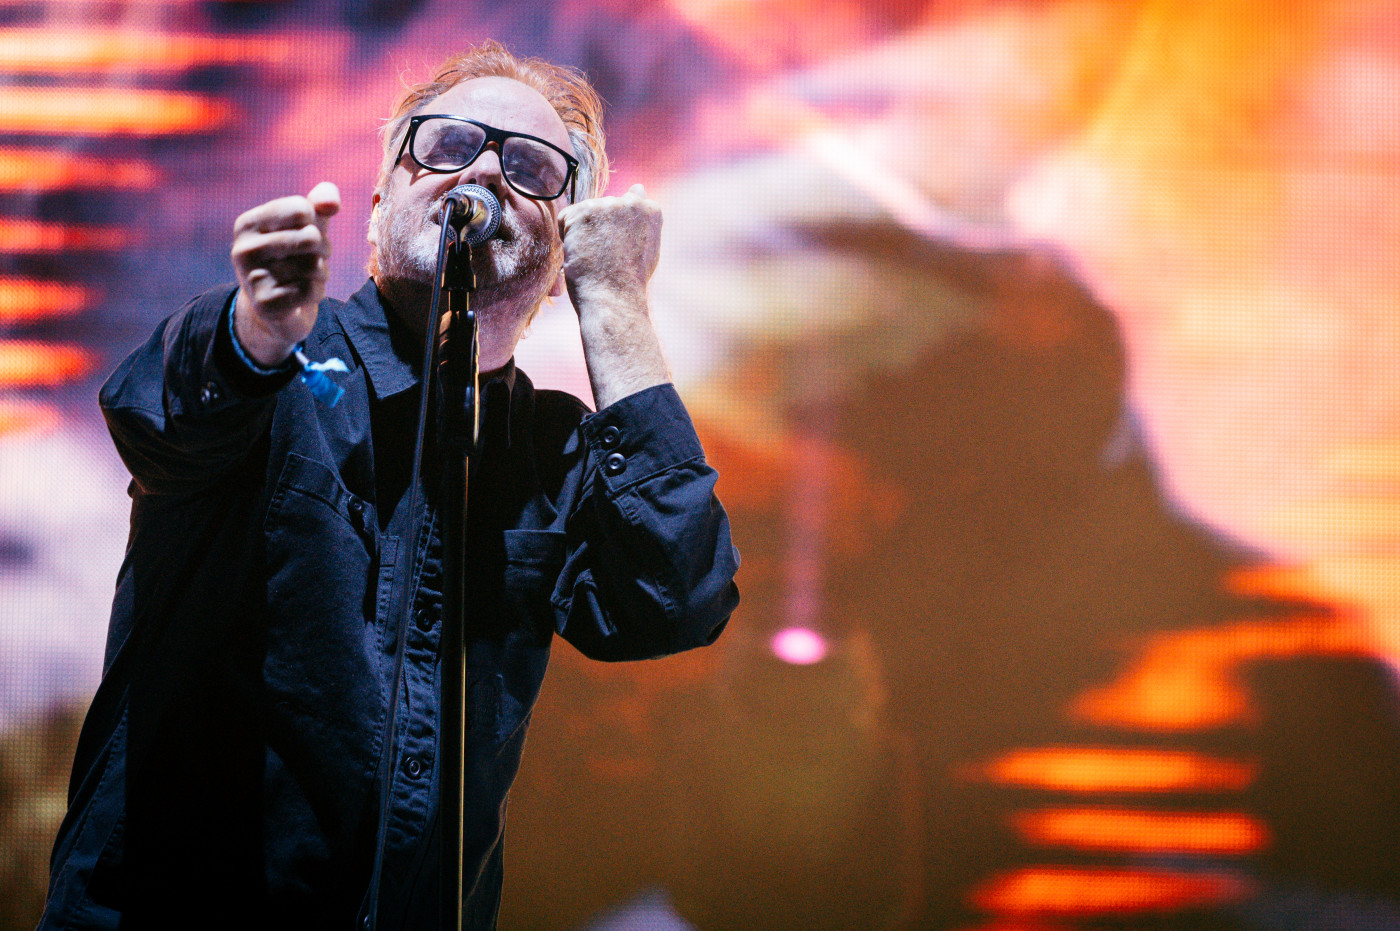 Matt Berninger of The National onstage at Connect 2022